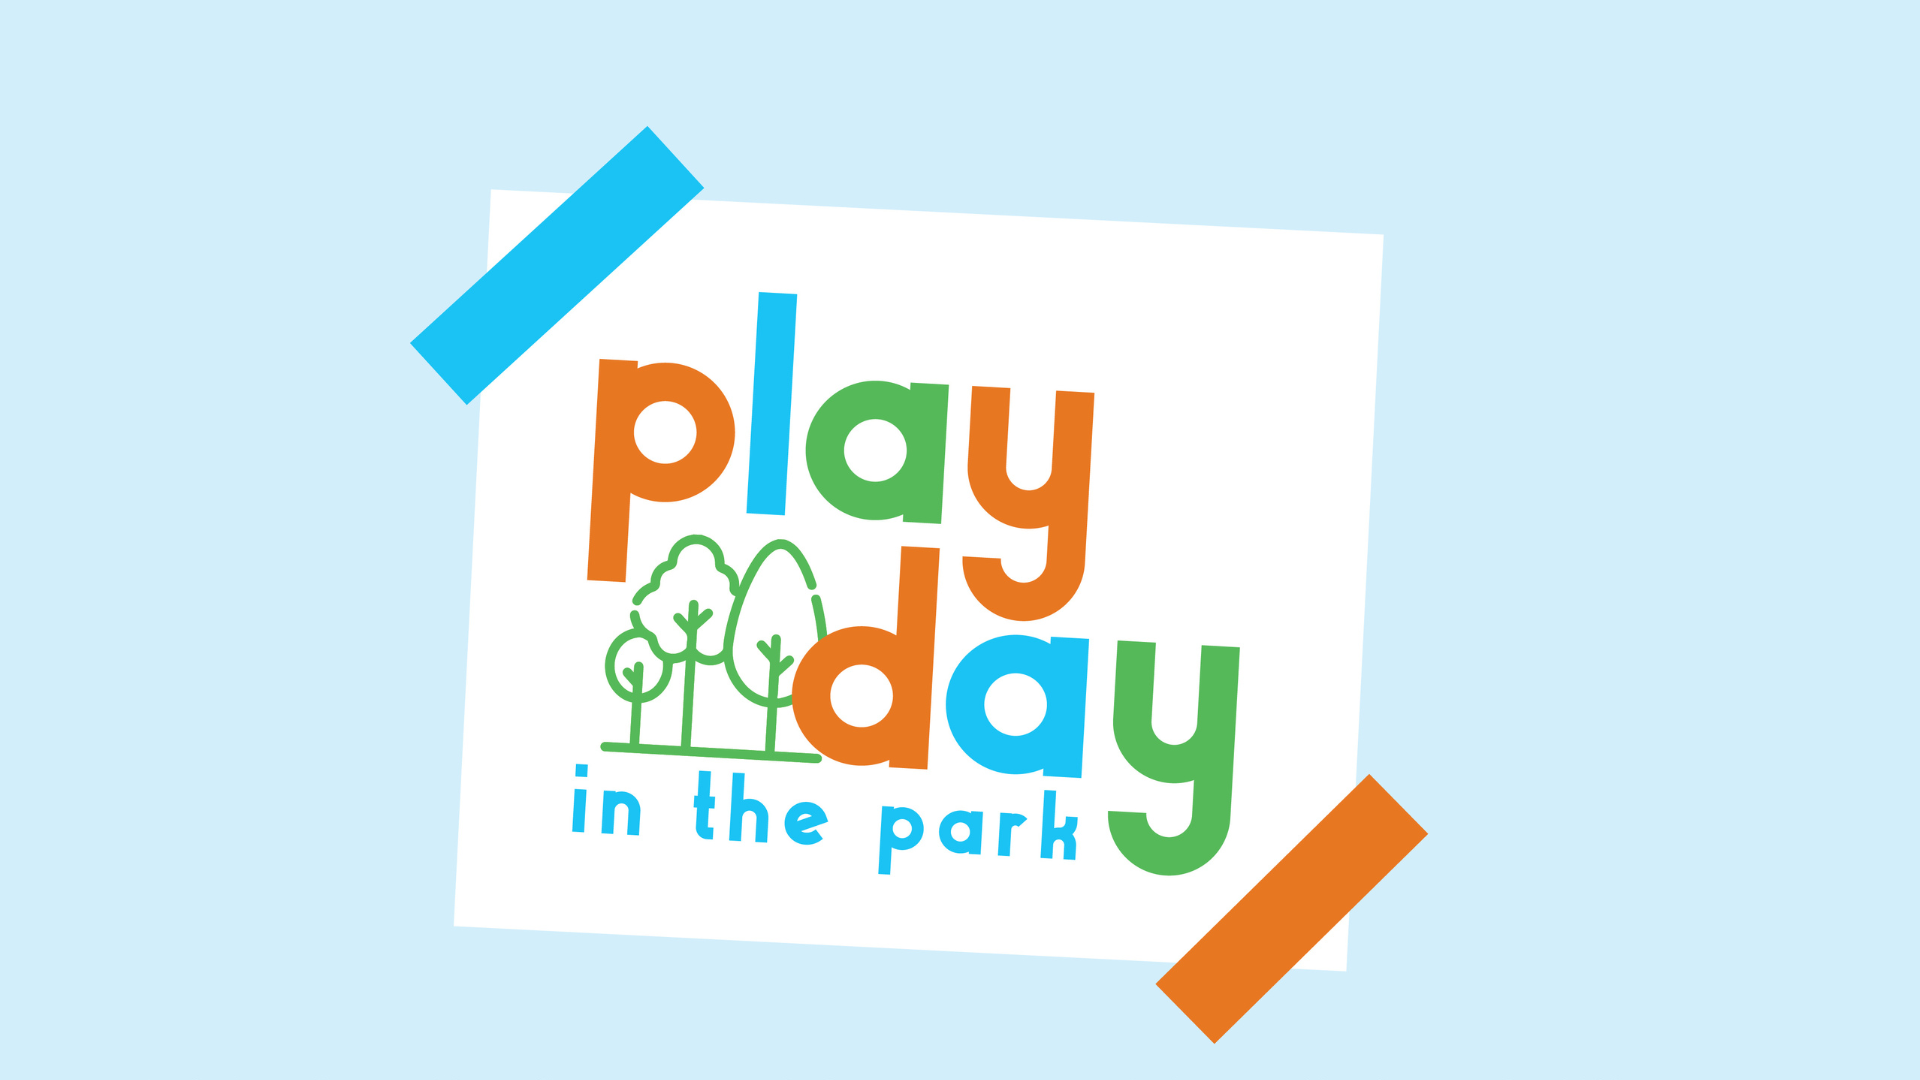 Image says Play Day in the Park